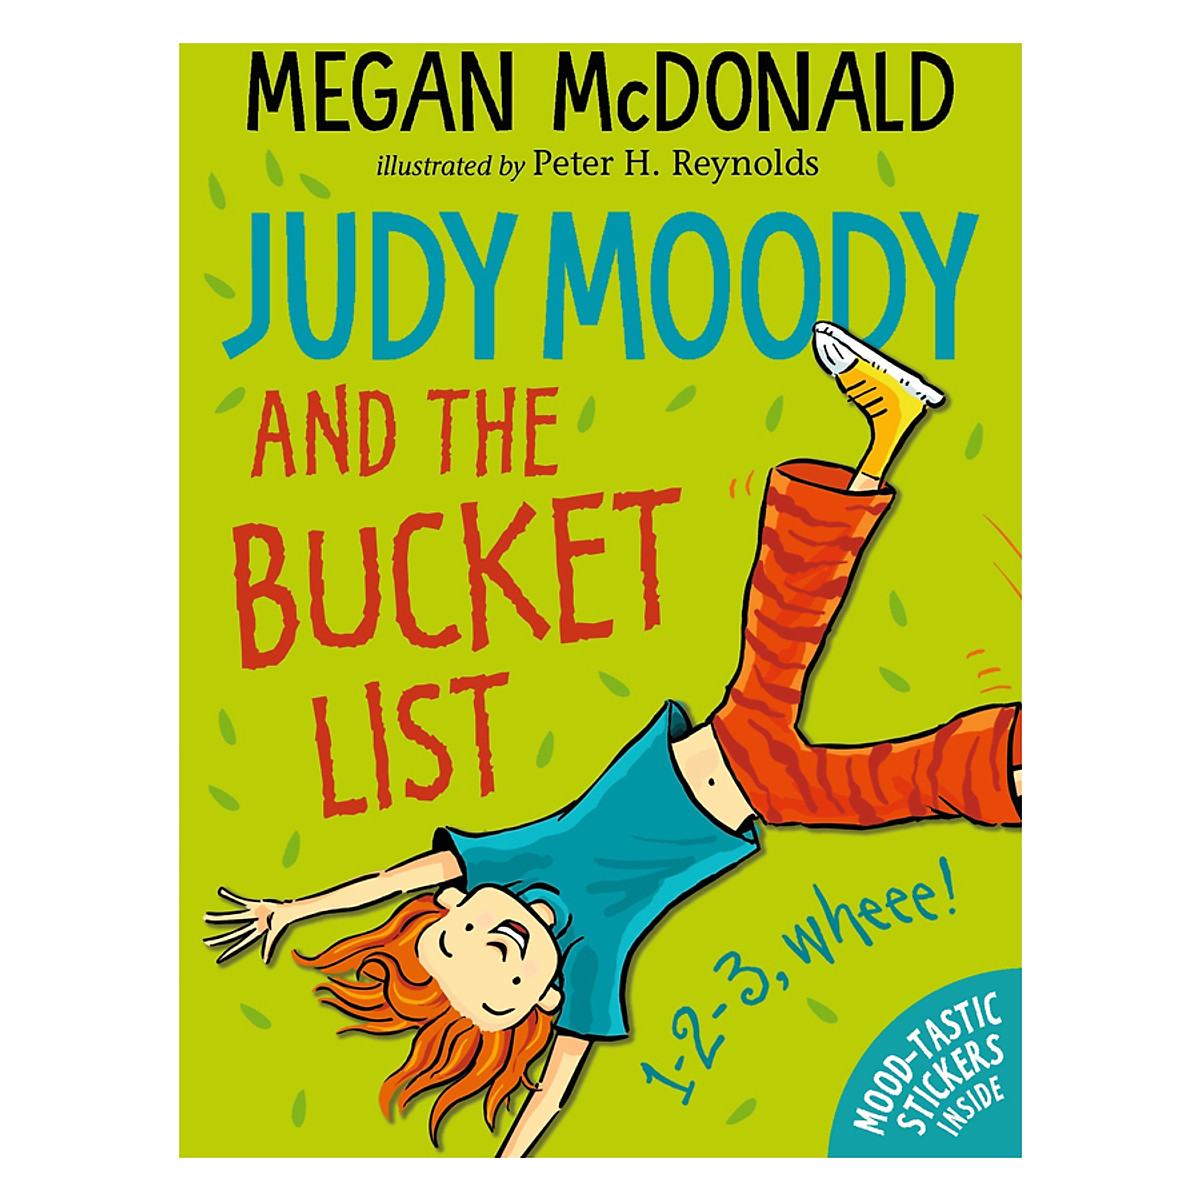 Judy Moody And The Bucket List